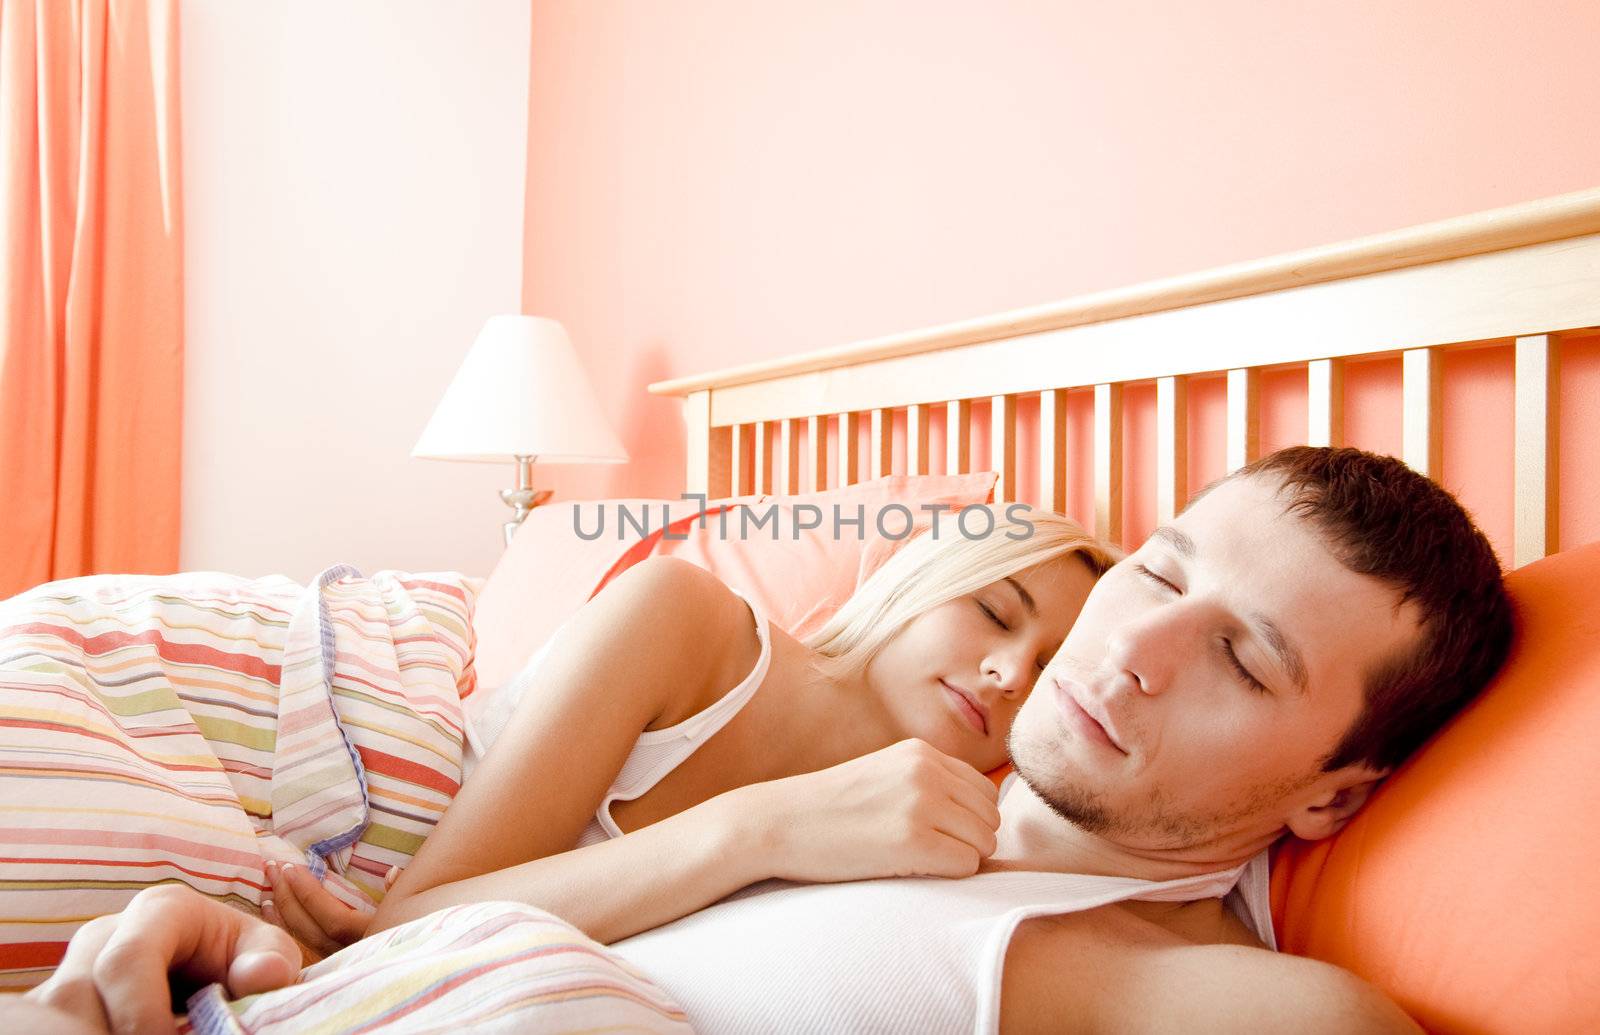 Man and woman sleep close together in a brightly-colored bedroom. Horizontal format.